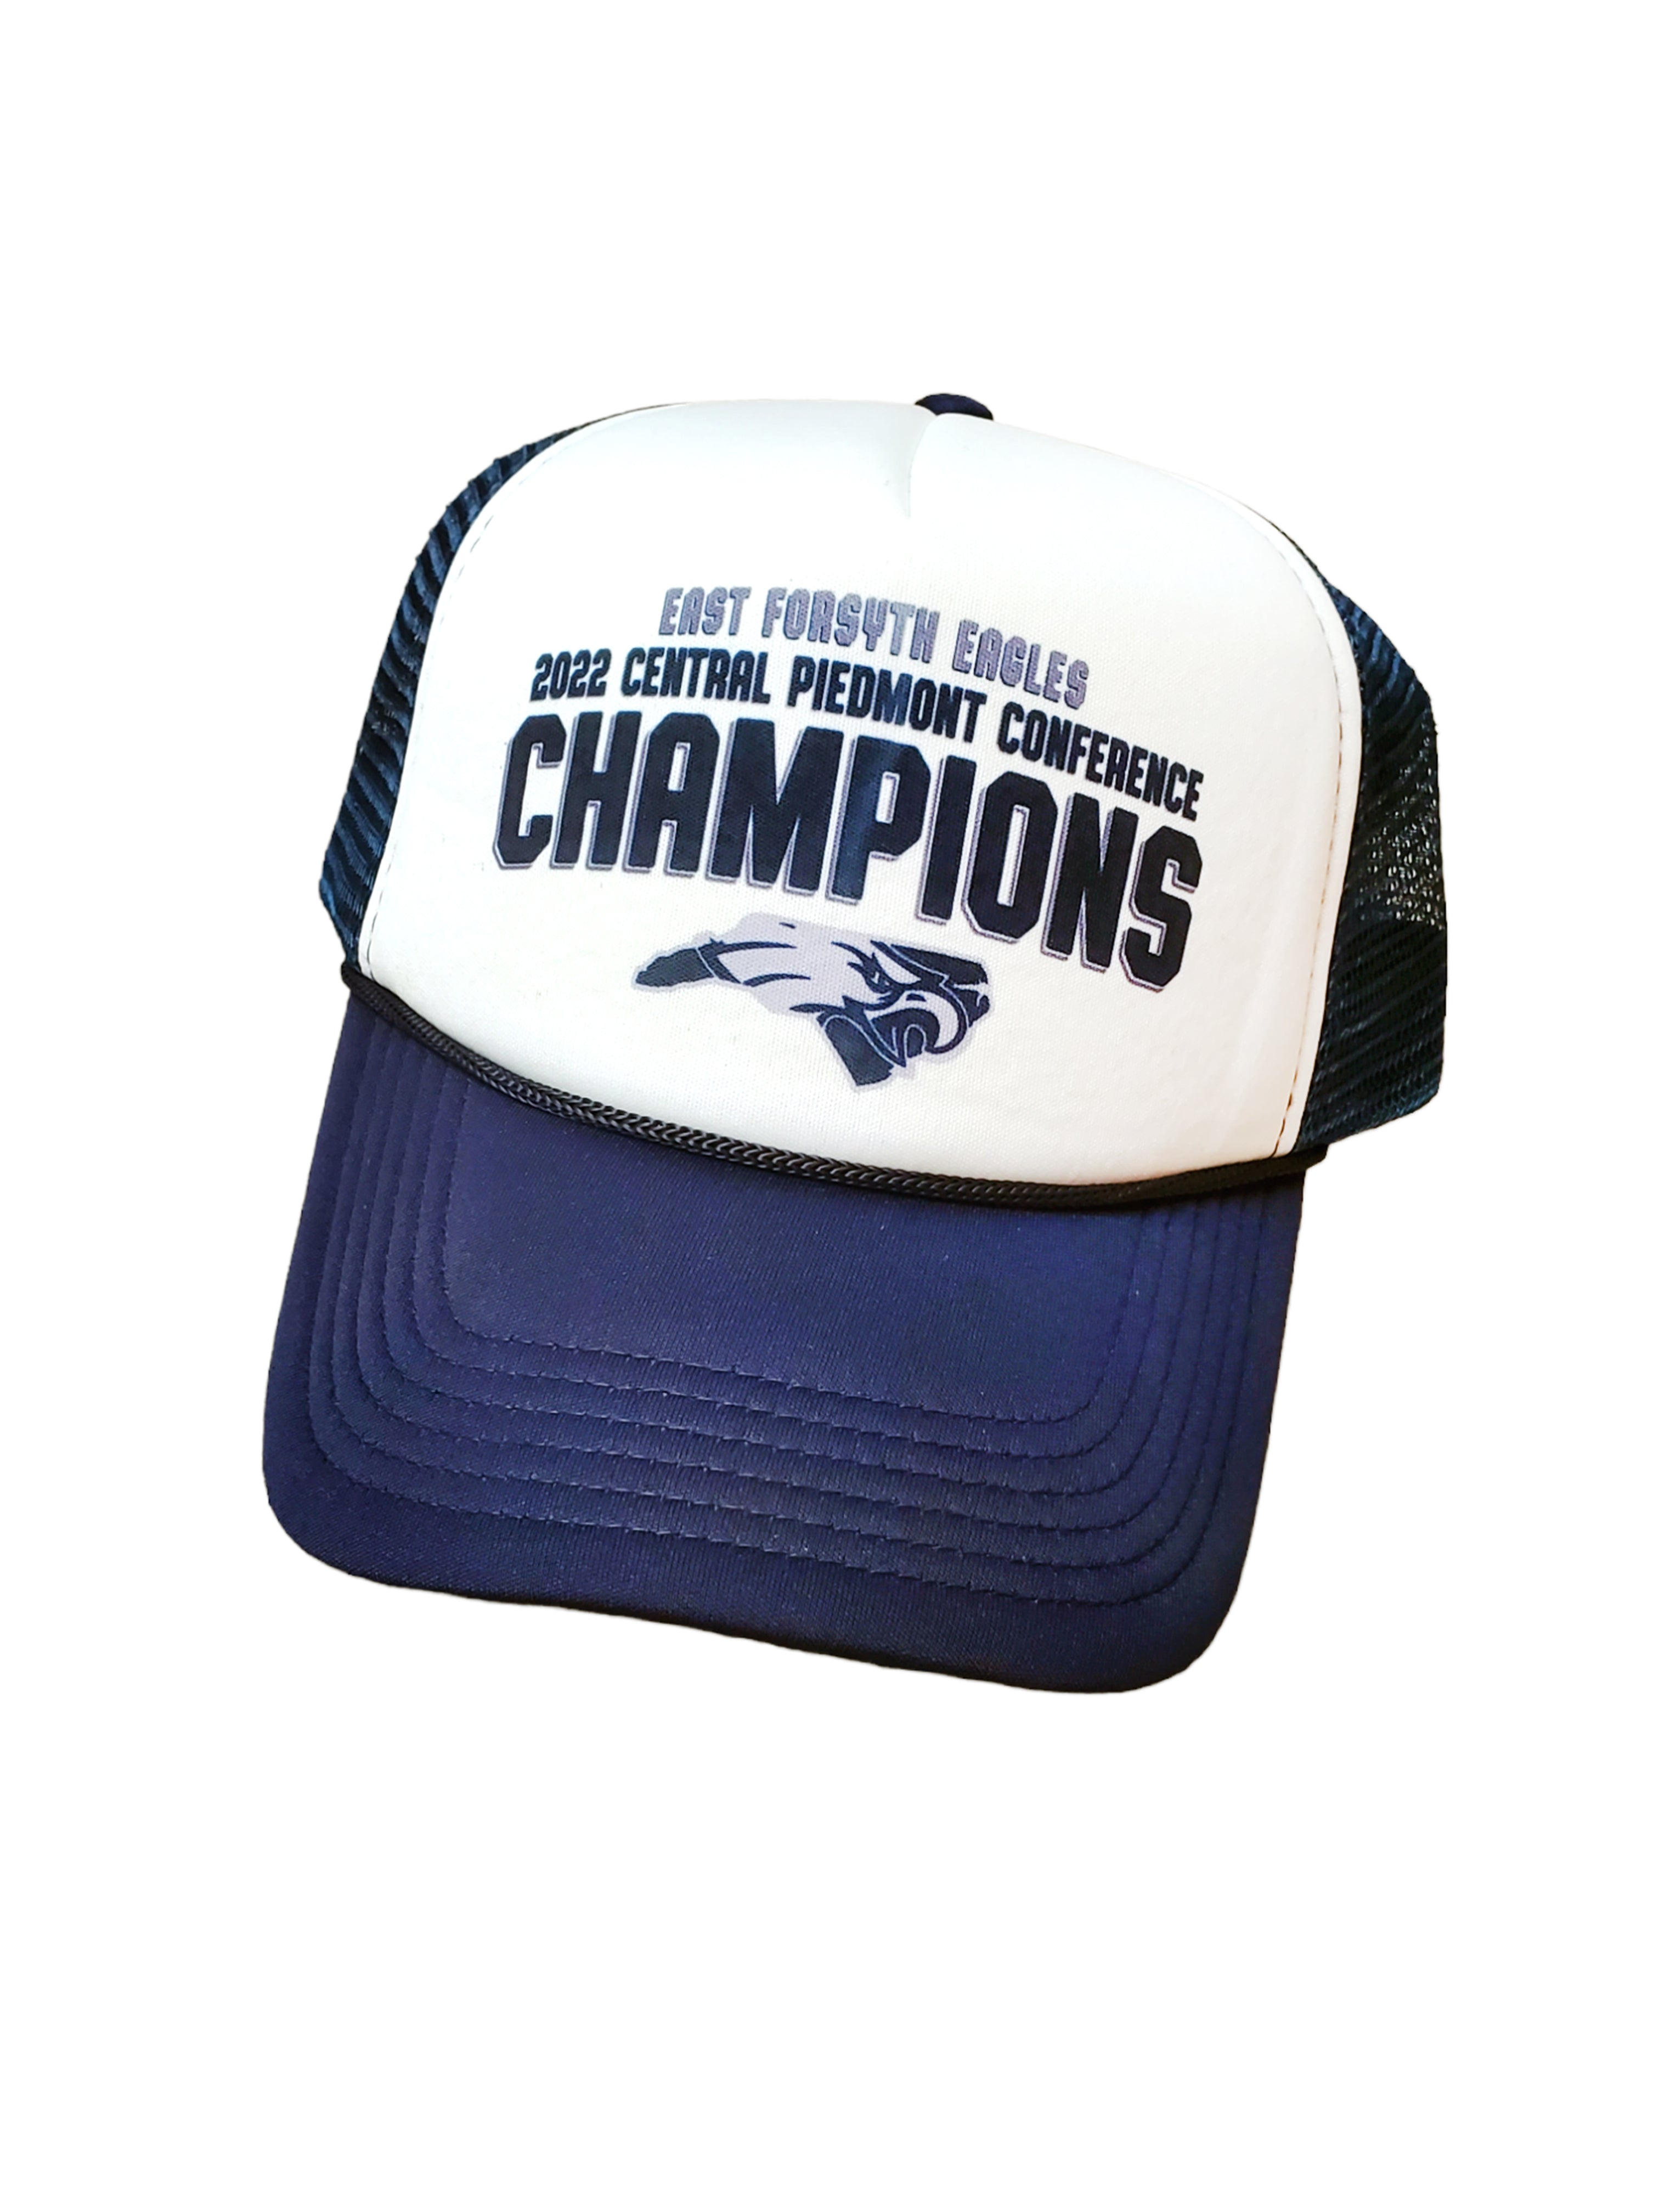 2022 Central Piedmont Conference Champions Trucker Hat, Navy blue and –  TouchdownClub